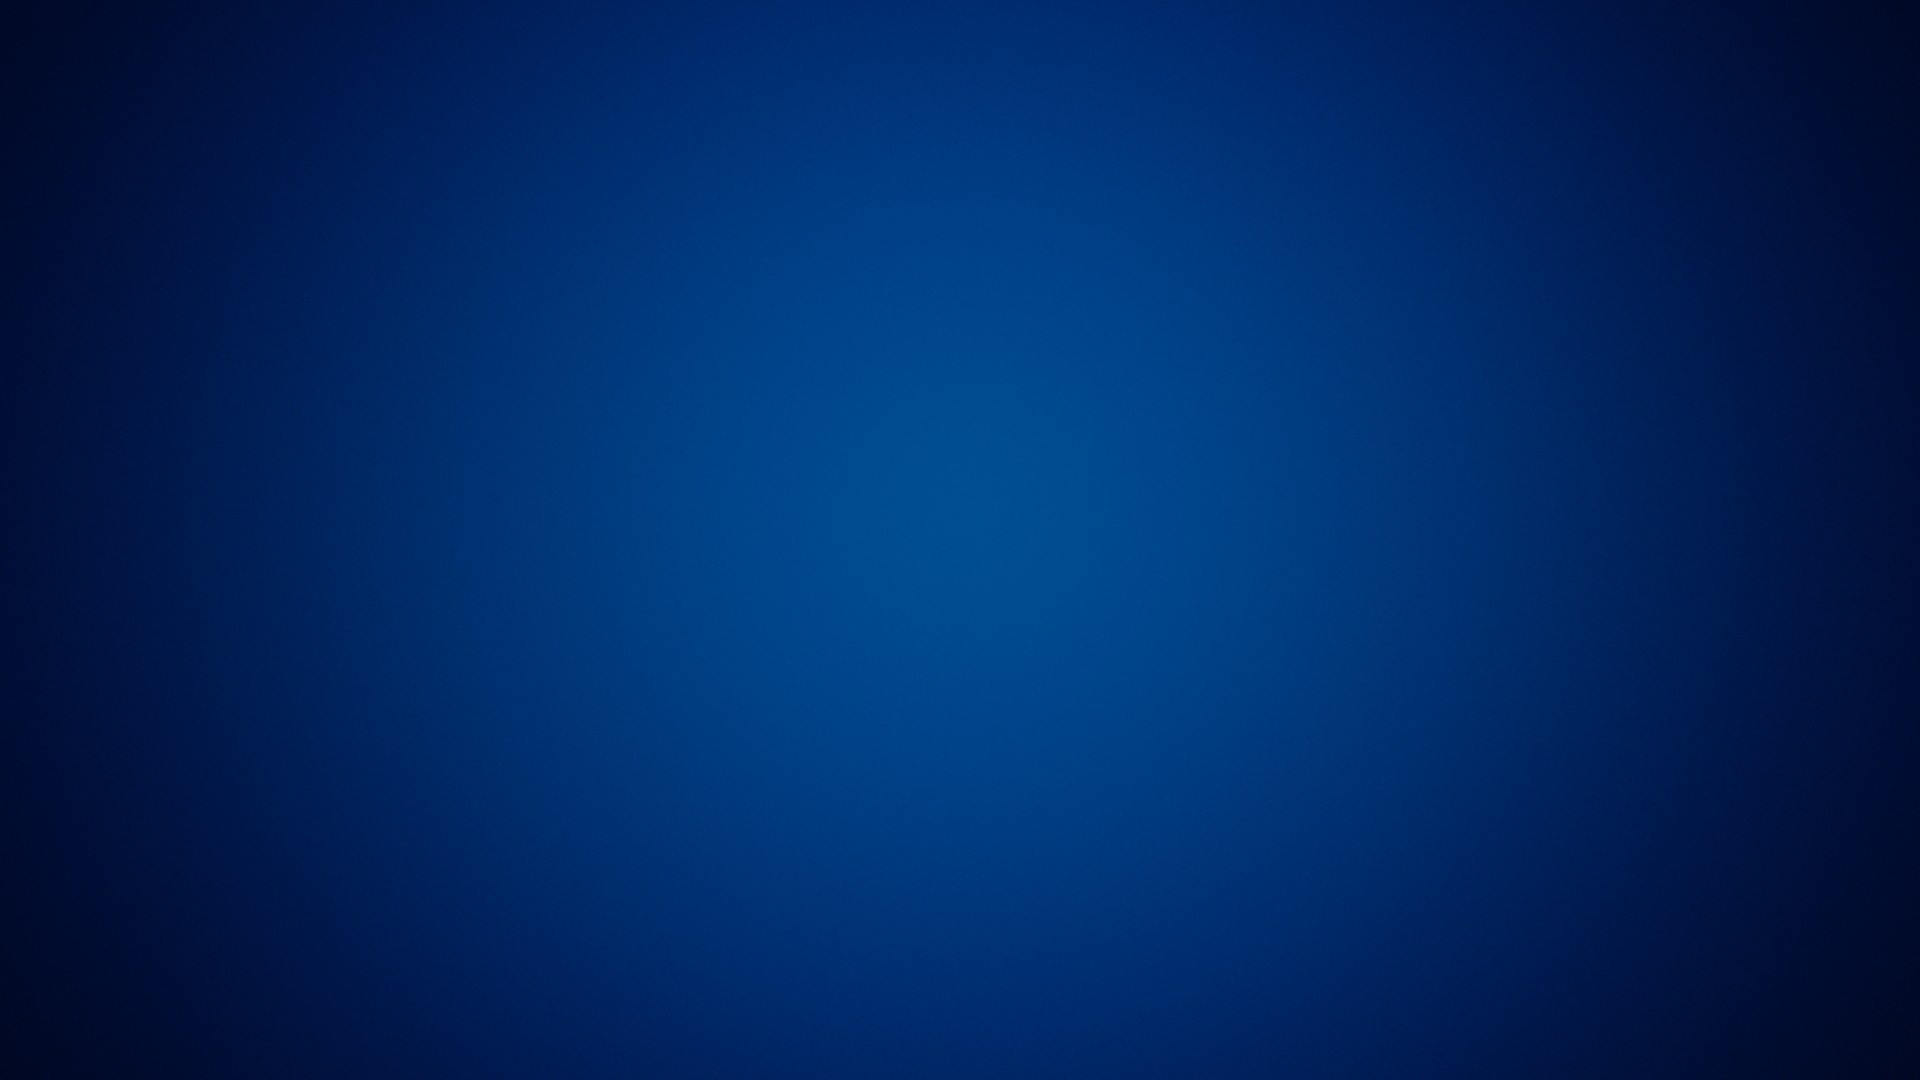 Blue Wallpaper HD With high-resolution 1920X1080 pixel. You can use this wallpaper for your Desktop Computer Backgrounds, Mac Wallpapers, Android Lock screen or iPhone Screensavers and another smartphone device